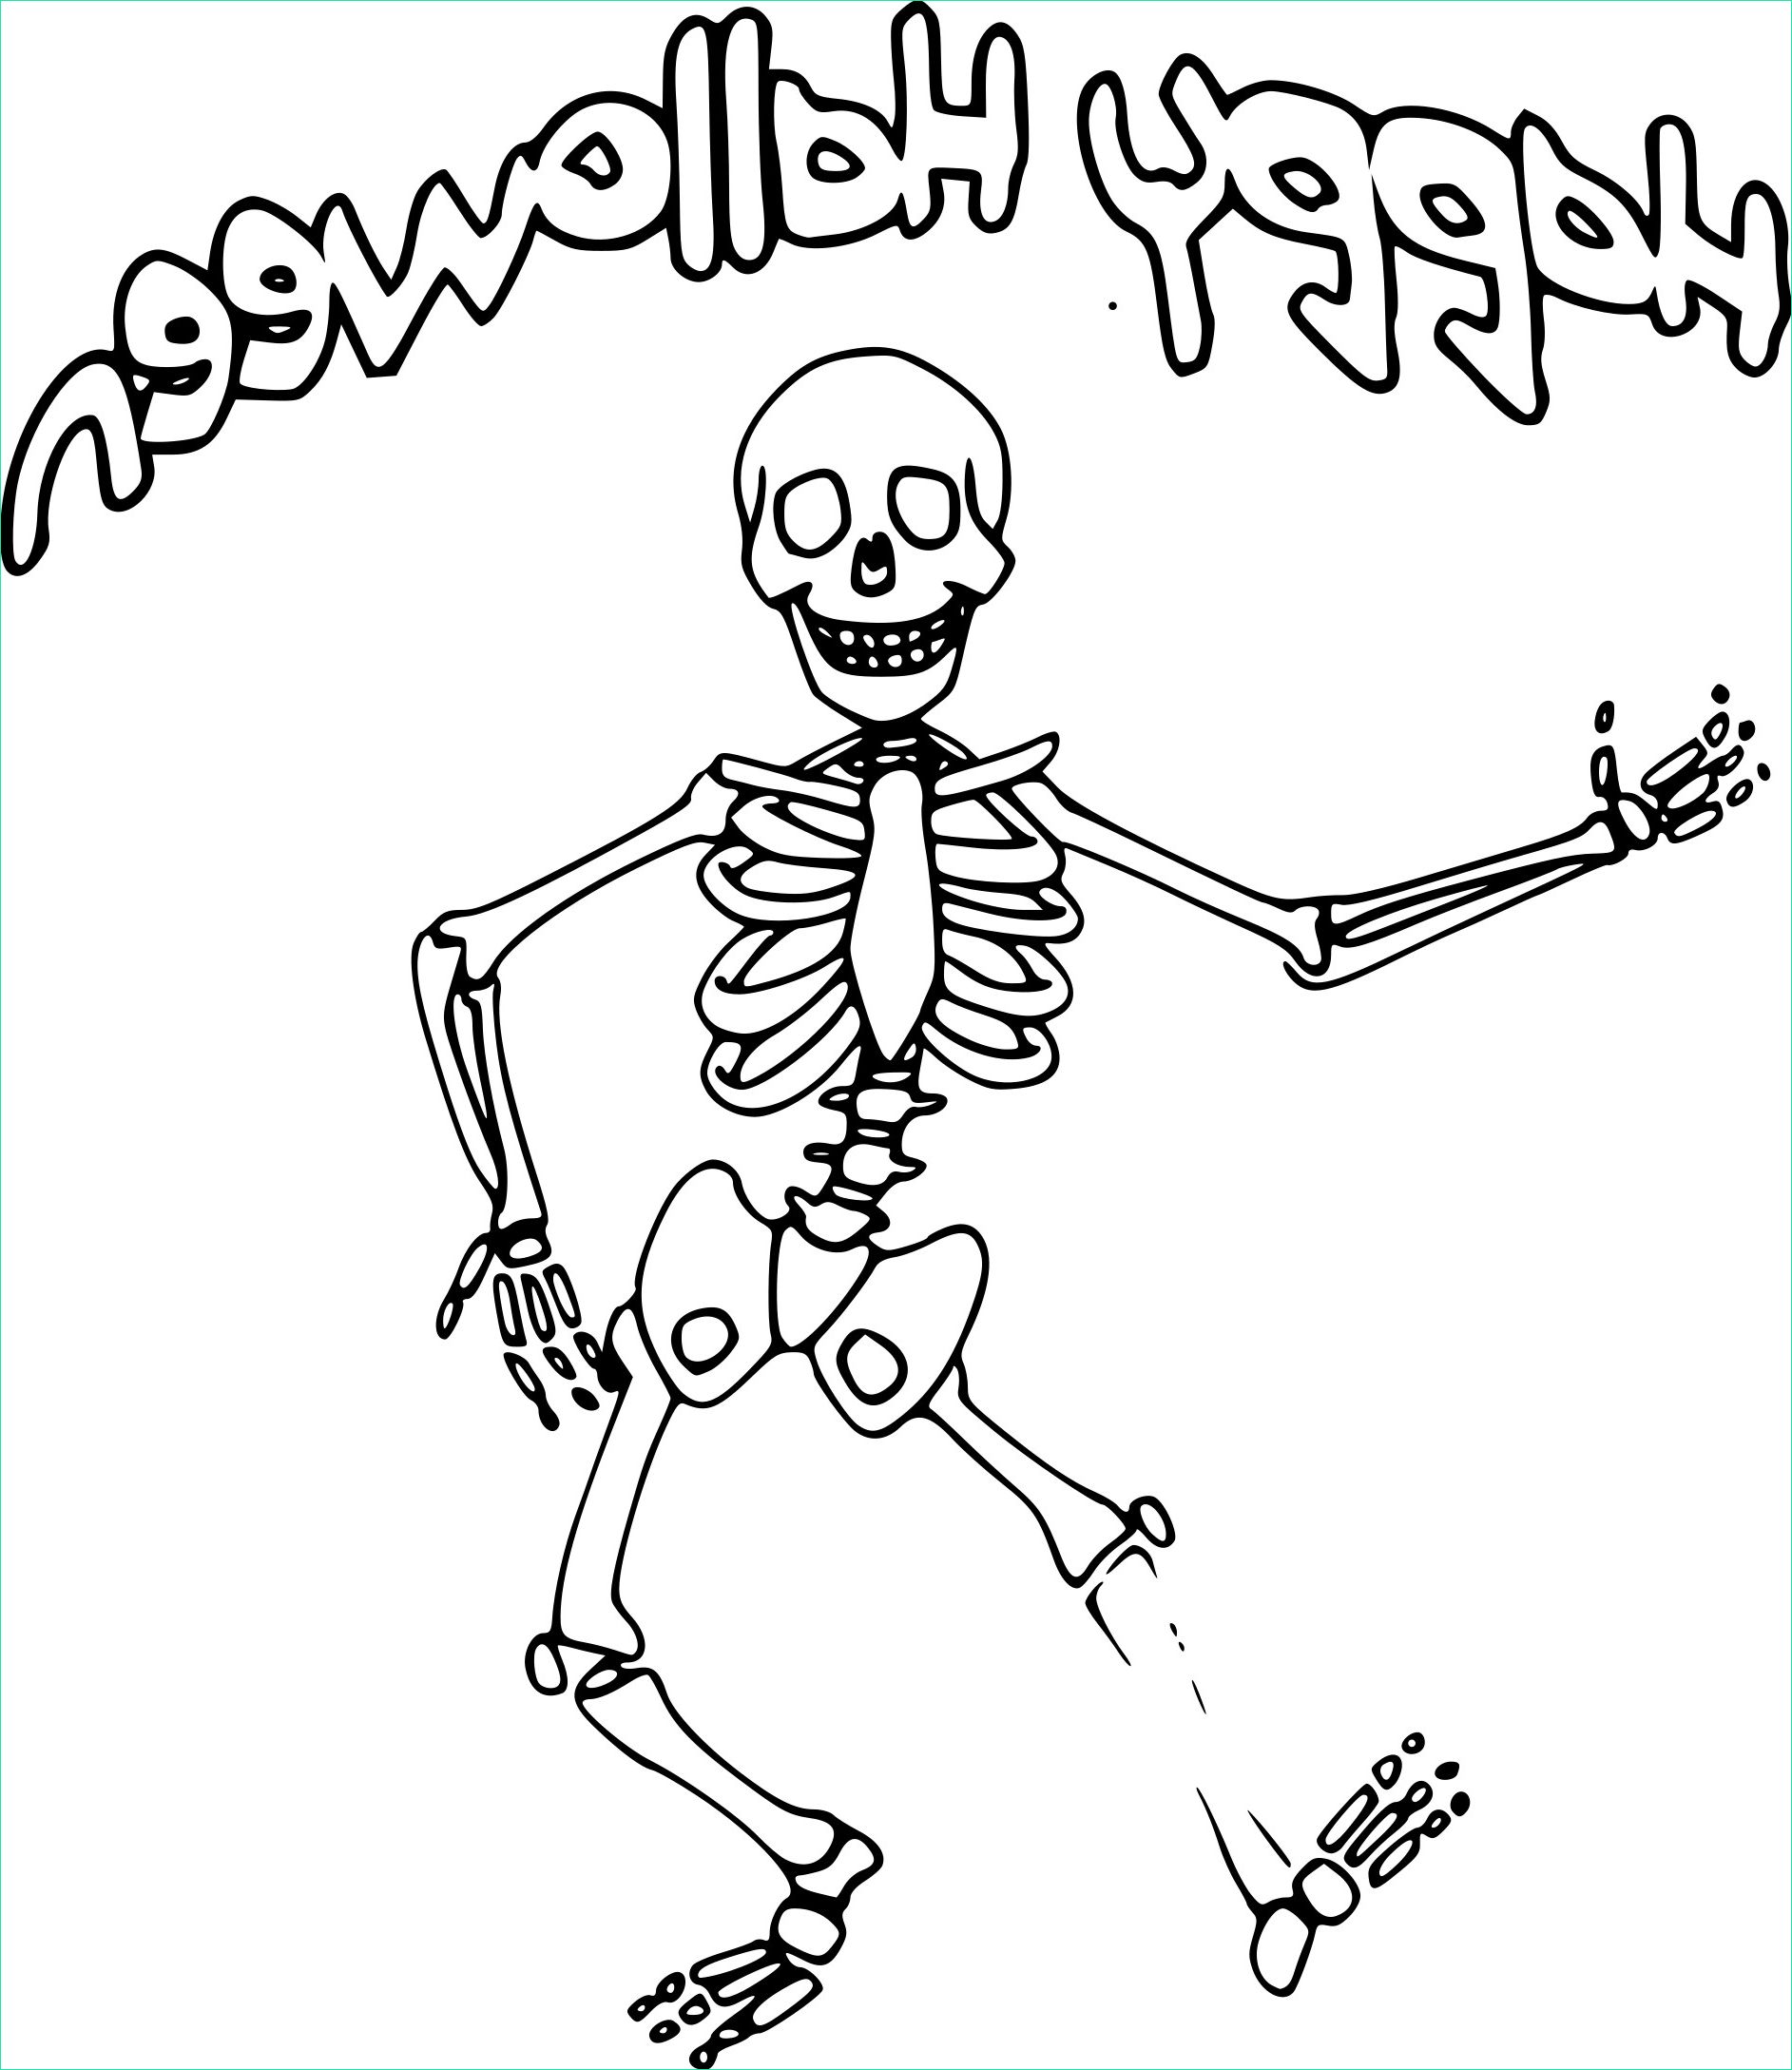 Dessin Squelette Halloween Luxe Photographie Coloriage Squelette Halloween à Imprimer Sur Coloriages Fo